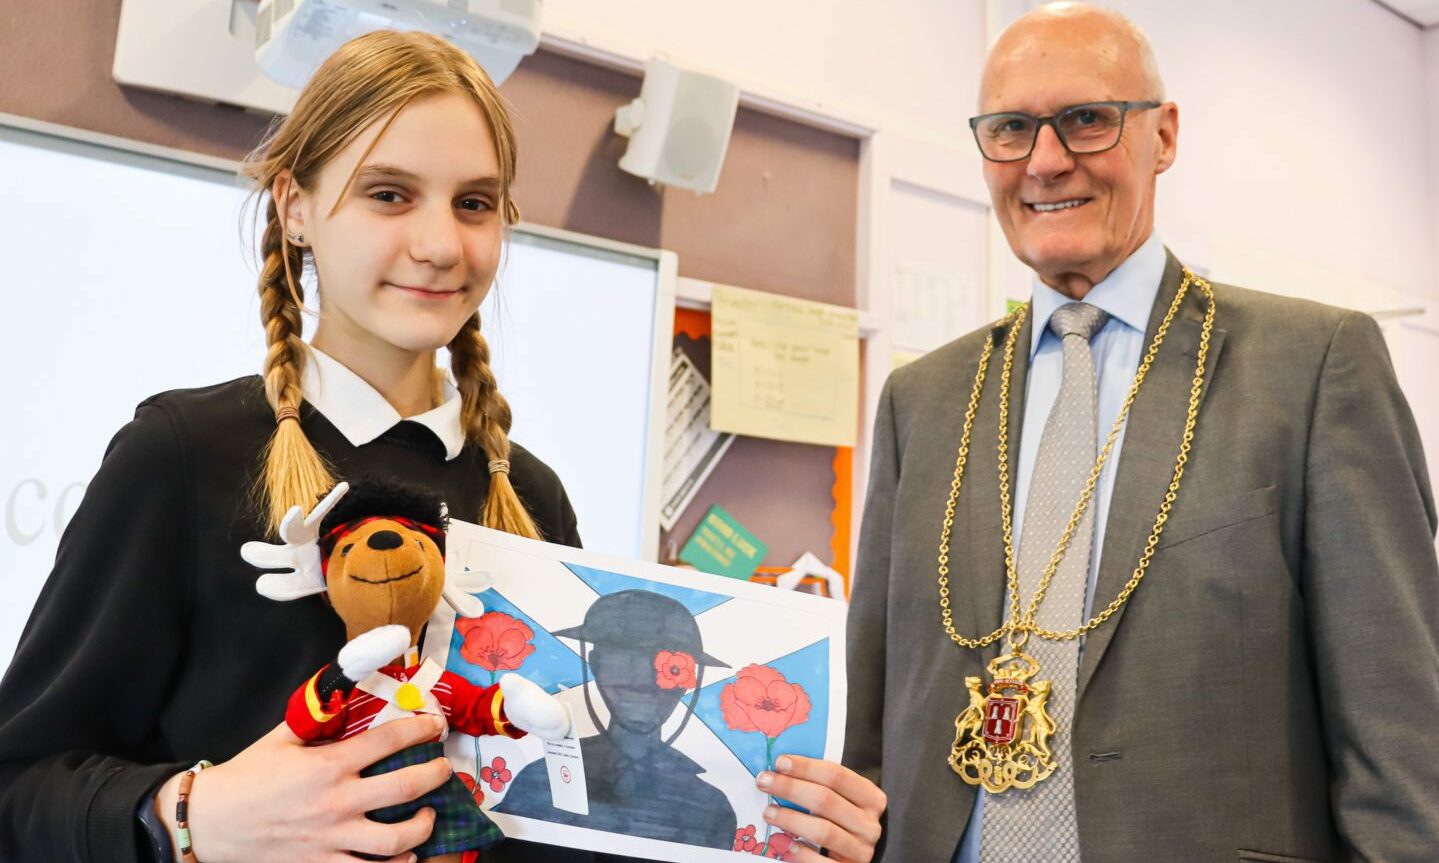 Zuzanna Bolkowska, 12, designed the flag which will be handed out at the parade. She is pictured with Lord Lieutenant David Cameron. Supplied by Aberdeen City Council.